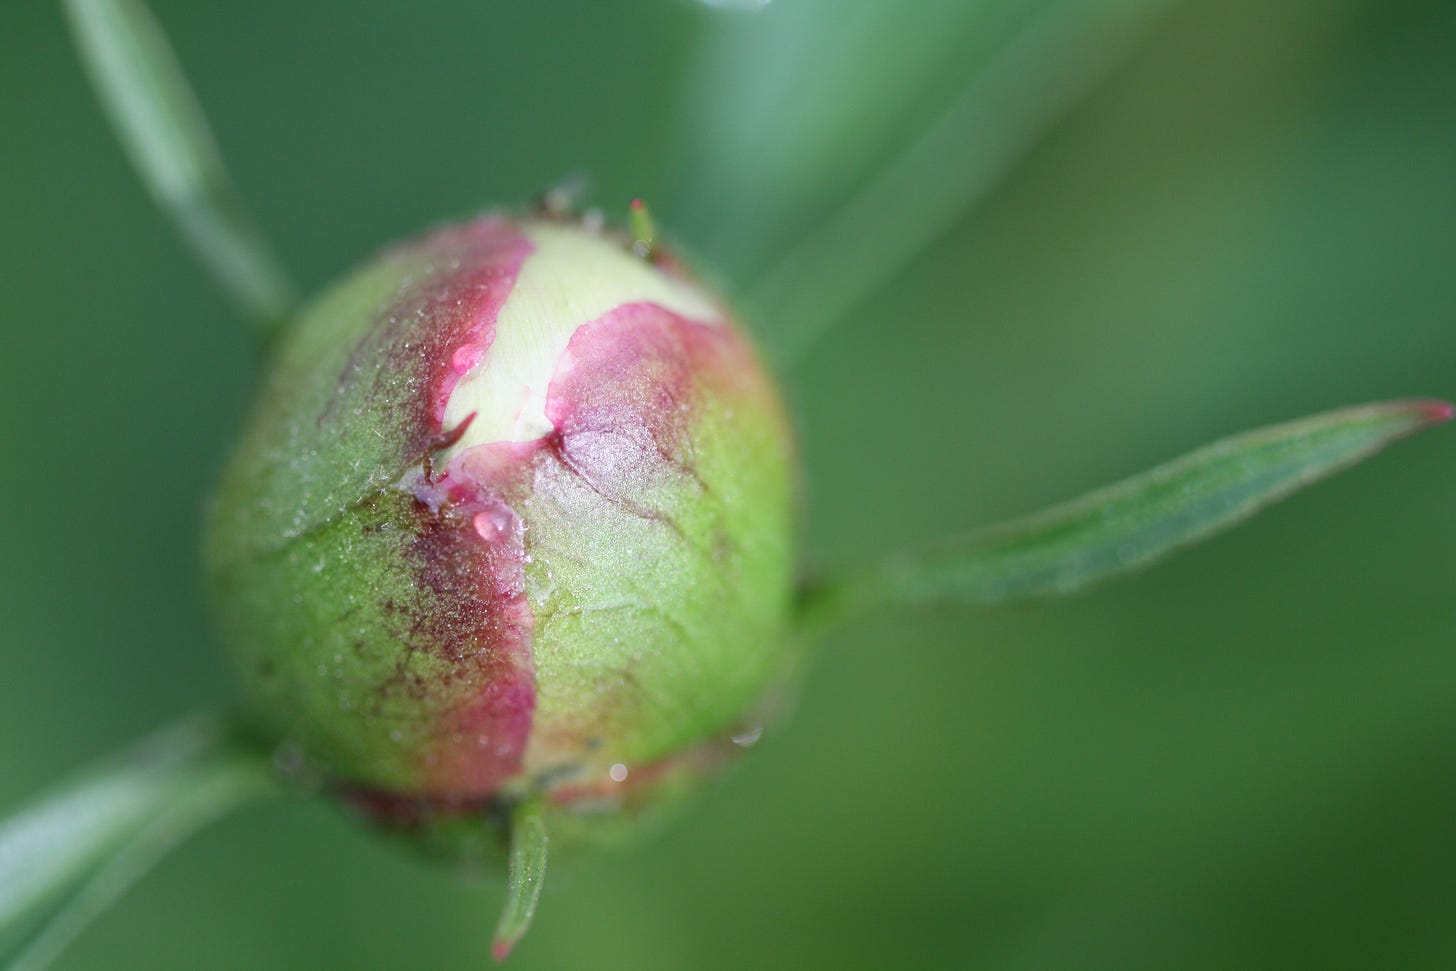 a peony bud, almost ready to open. green sepals wrapped around a pinkish-white sleeping flower.